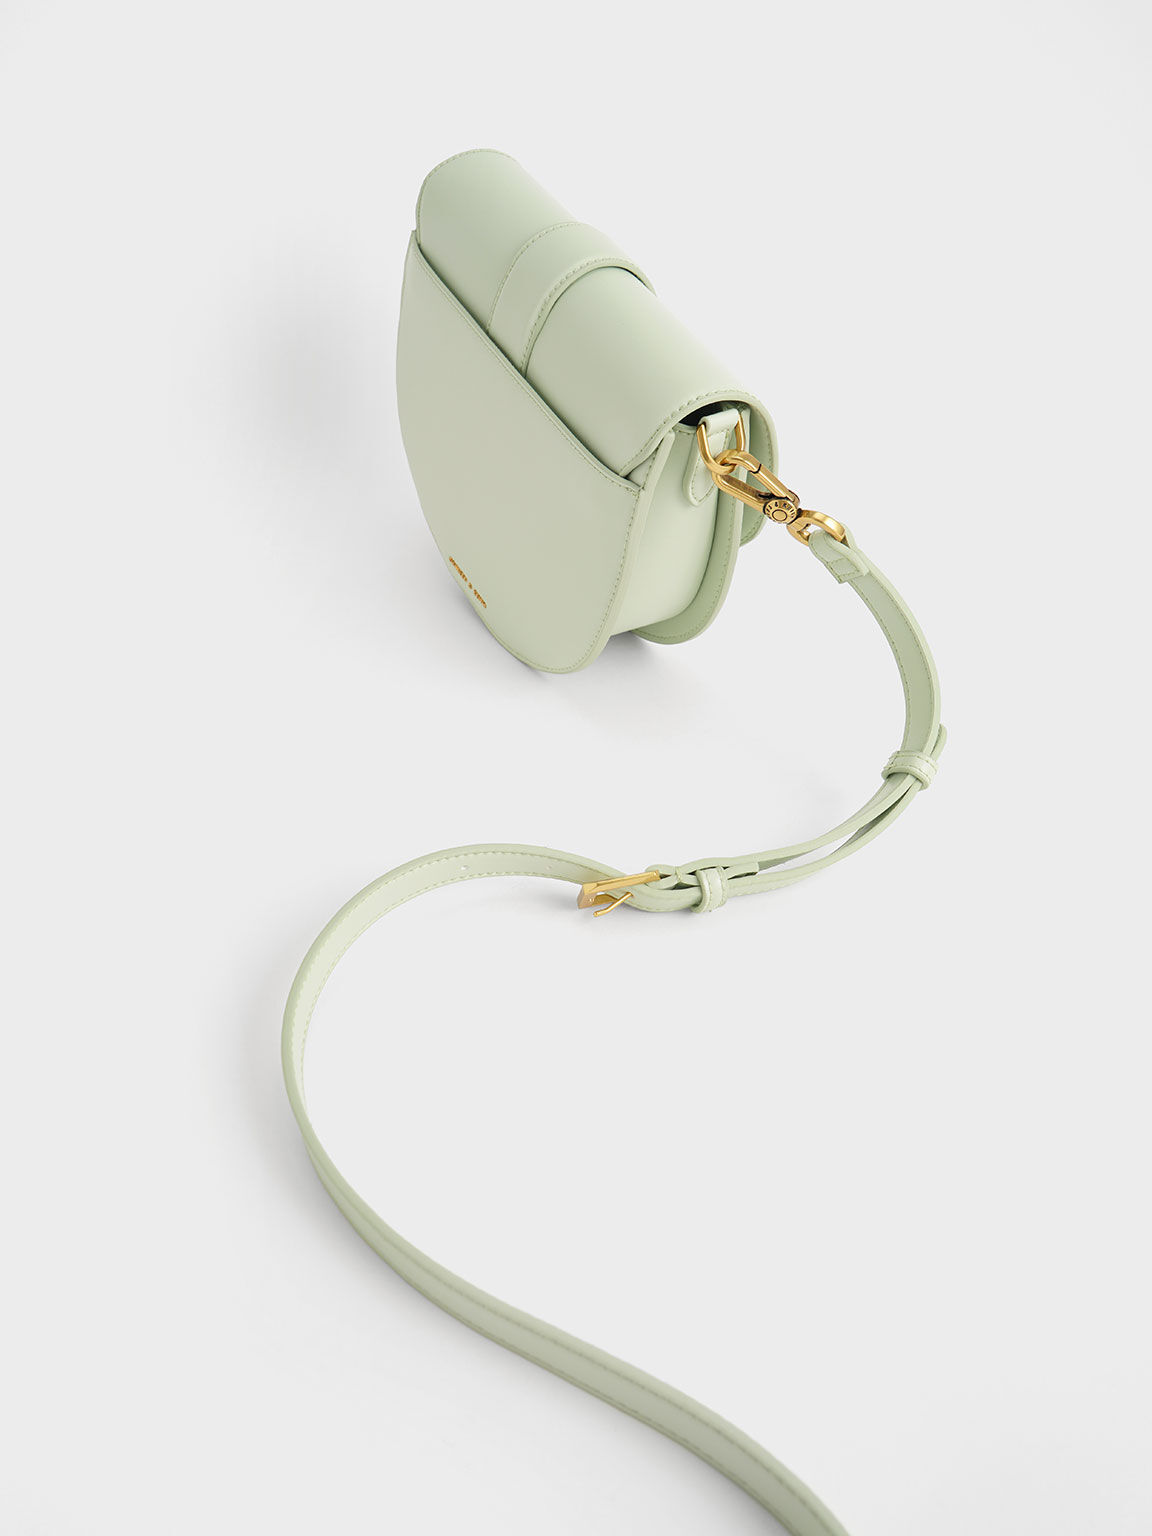 The khaki Gabine saddle bag is not only just as versatile as the black  version, but is also a little more unique. #CharlesKeithSS21…